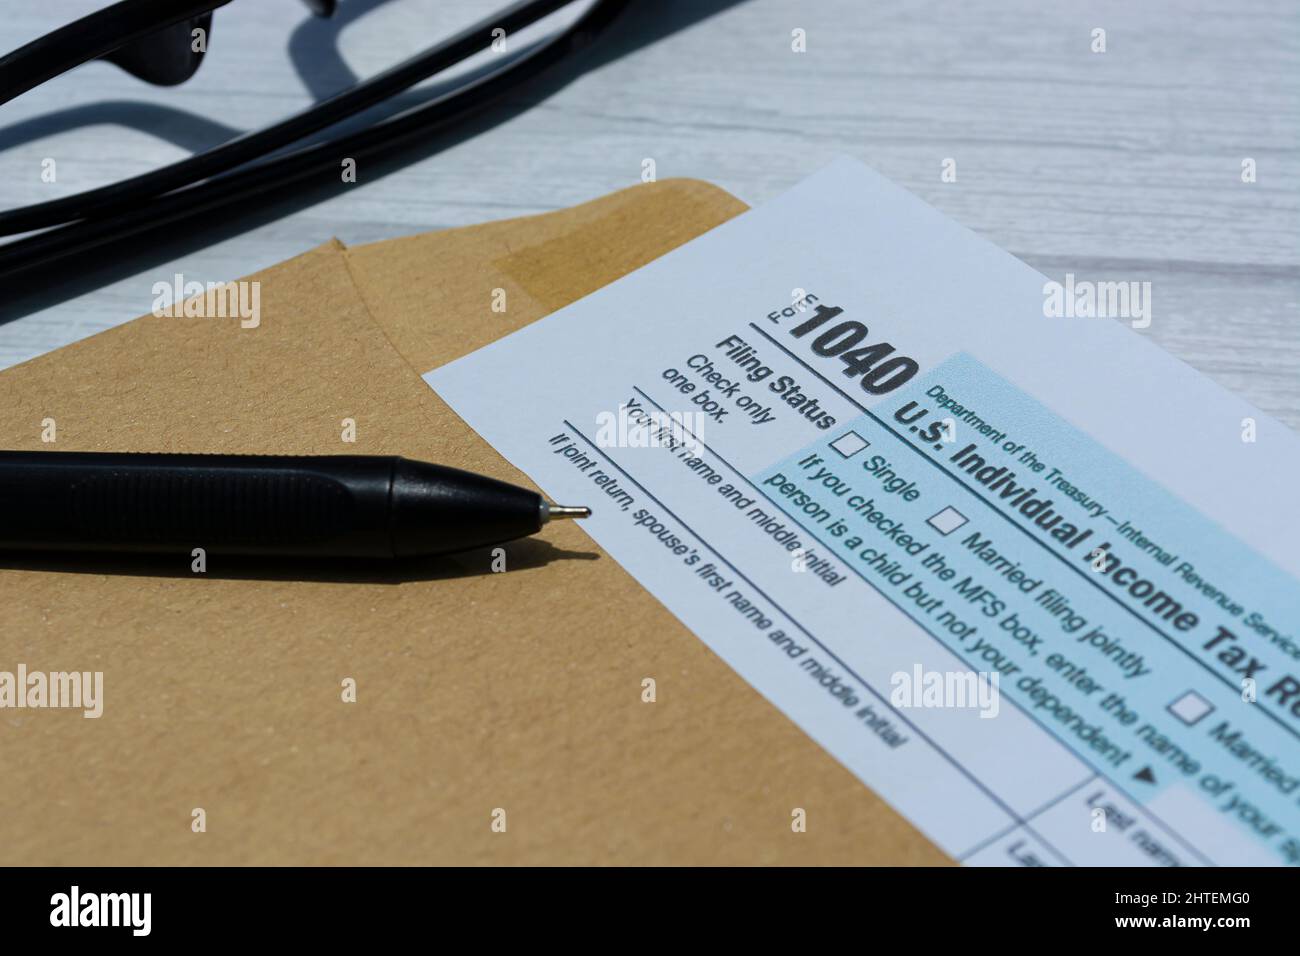 Tax forms 1040. U.S Individual Income Tax Return in an brown envelope on a desk. Stock Photo